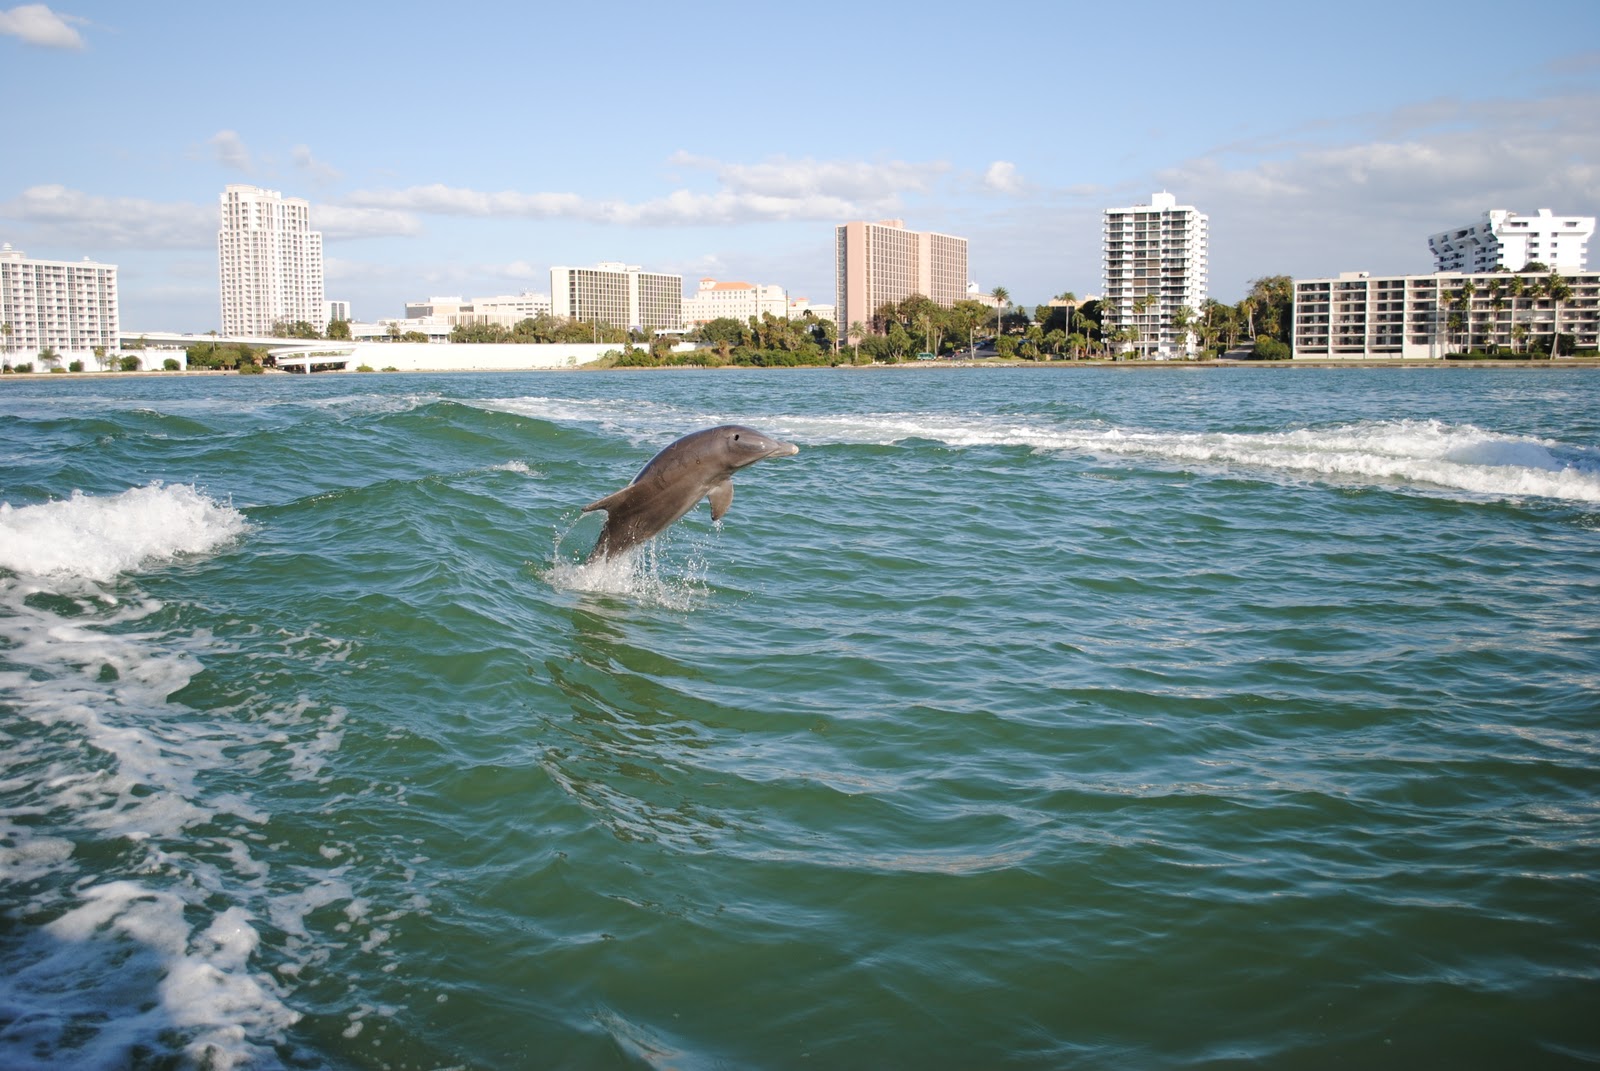 ... Toot is a small dolphin sightseeing boat tour in Clearwater, Florida